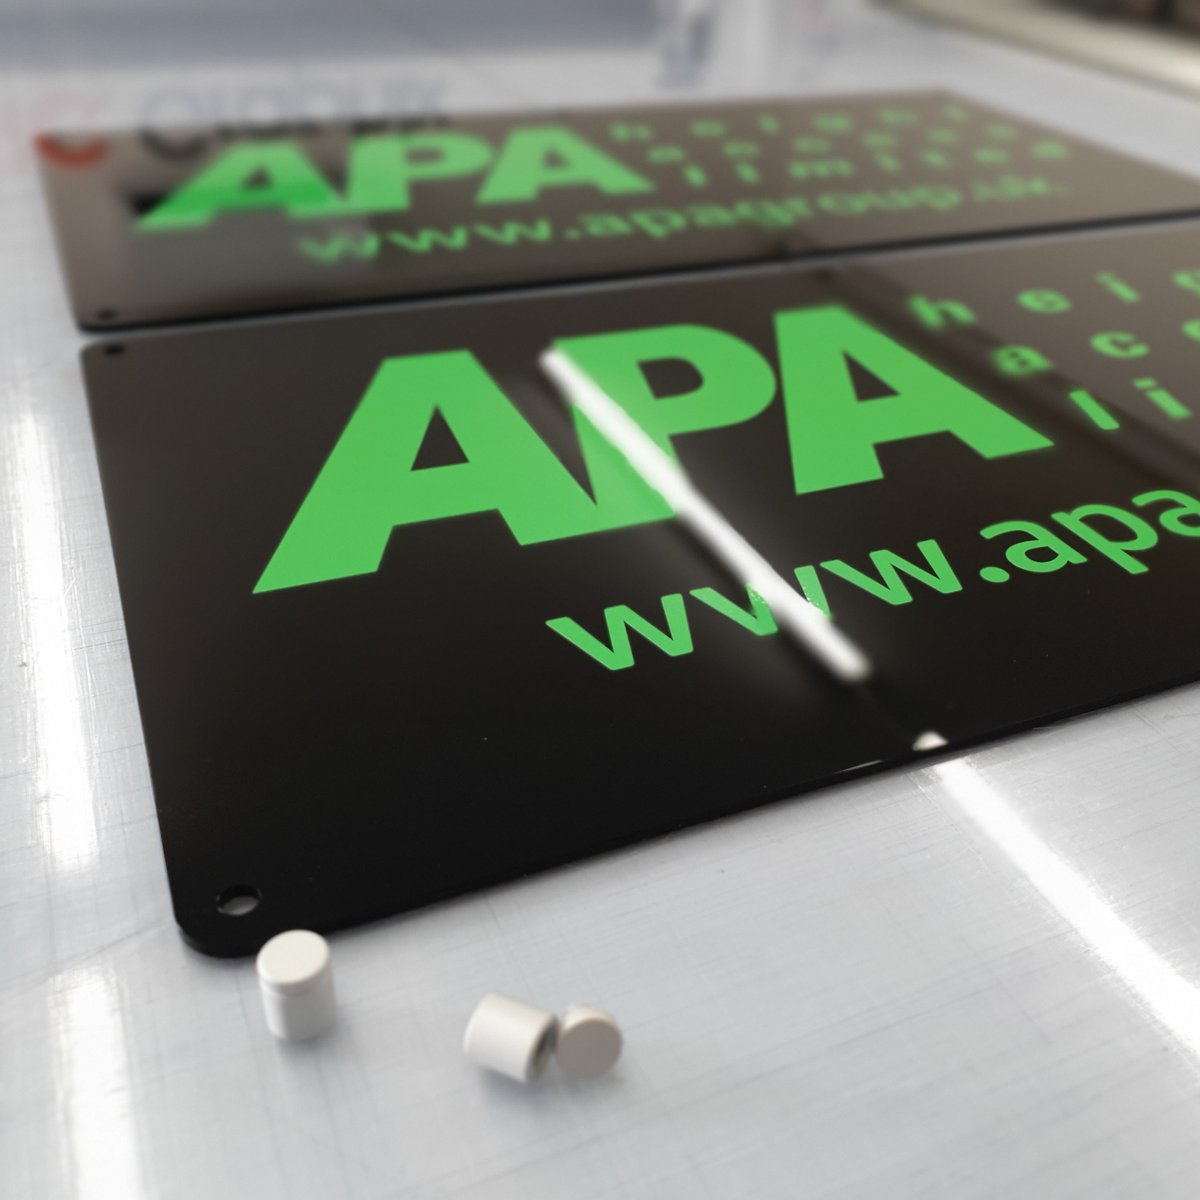 Here's some custom perspex signs recently created for #APAHeightAccessLimited.

#HeightAccess #Construction #Signs #Signage #AcrylicSigns #Perspex #BarnsleyBusiness #BarnsleyIsBrill